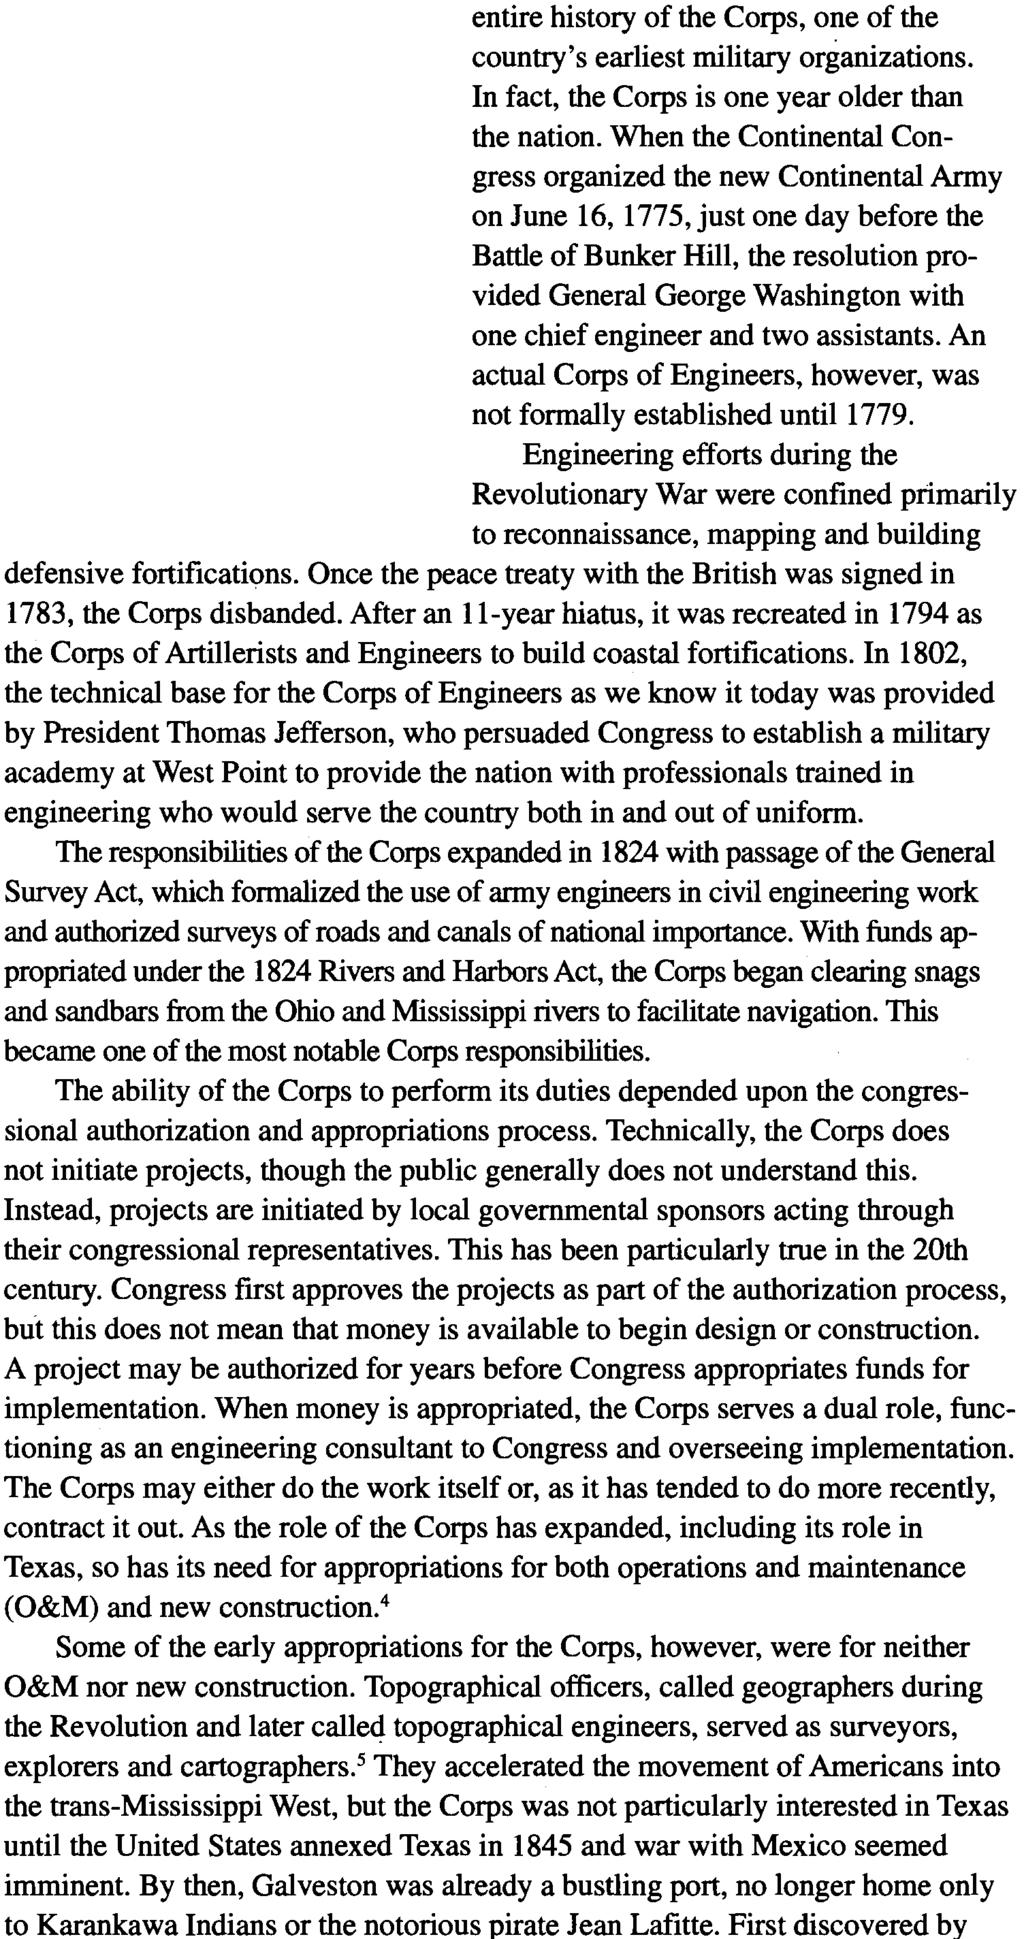 The Corps of Engineers was part of the Continental Army before the Battle of Bunker Hill. entire history of the Corps, one of the country's earliest military organizations.